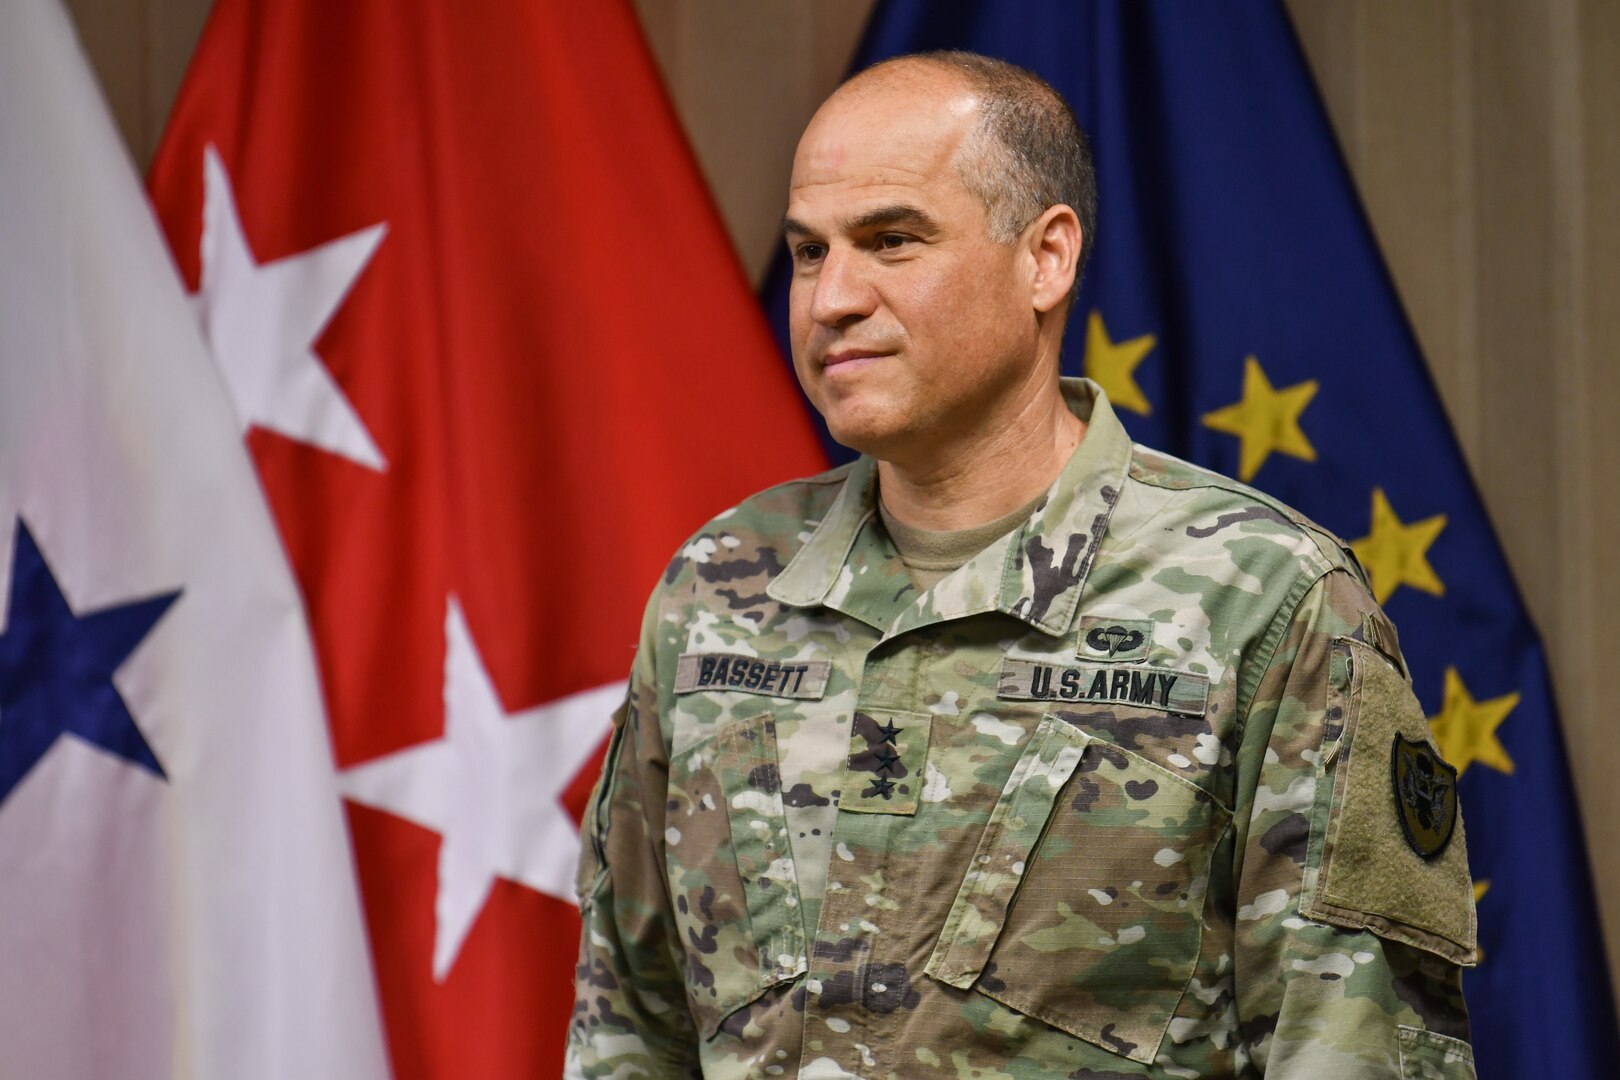 Army general stands in front of flags